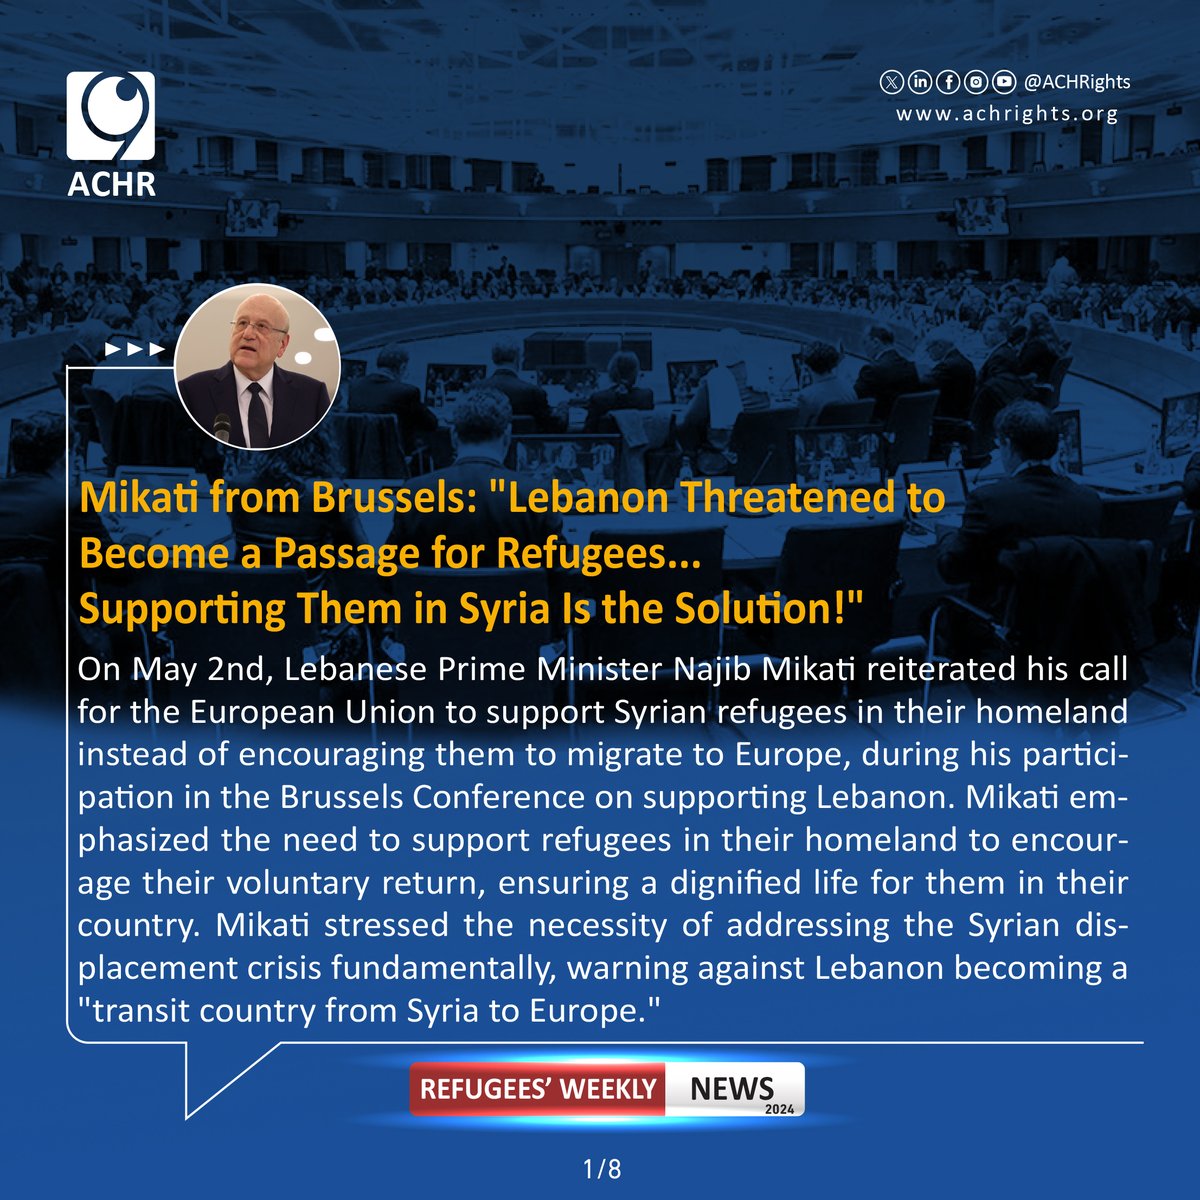 Mikati from Brussels: 'Lebanon Threatened to Become a Passage for Refugees... Supporting Them in Syria Is the Solution!'
#Together_for_Human_Rights #weeklynews #violations #humanrights #syrianrefugees #lebanon #syria #RefugeesRight